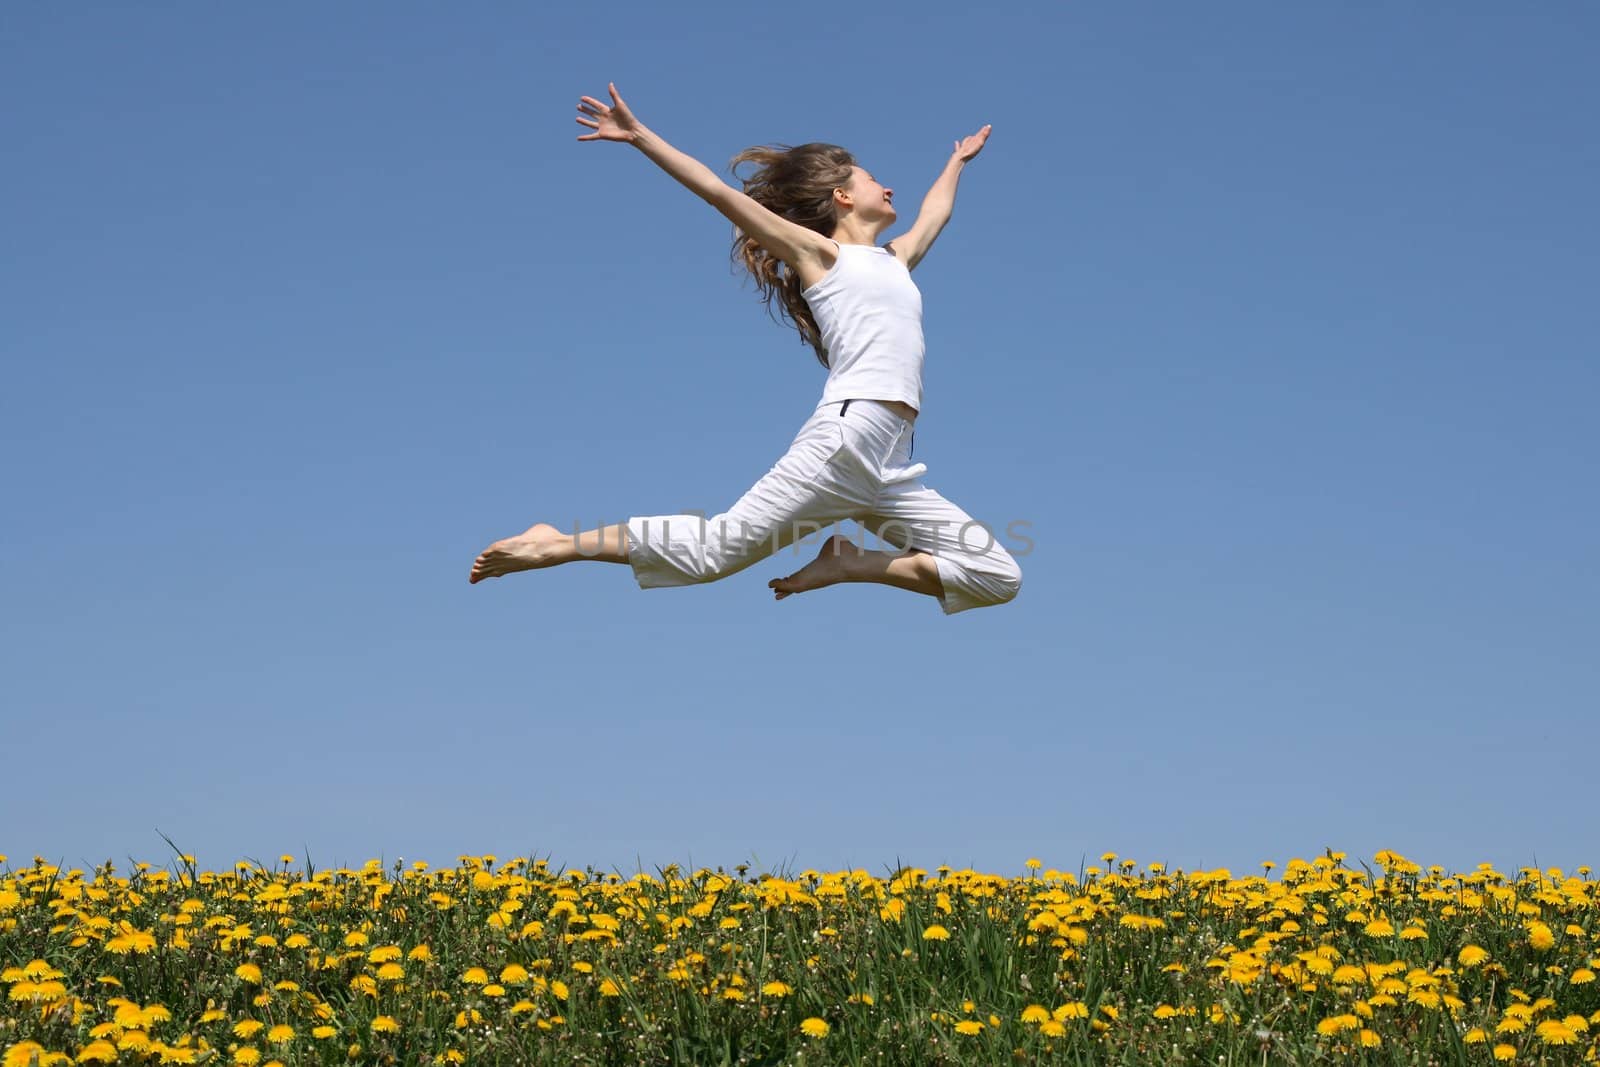 Girl in summer white clothes flying in a jump over flowering dandelion field.